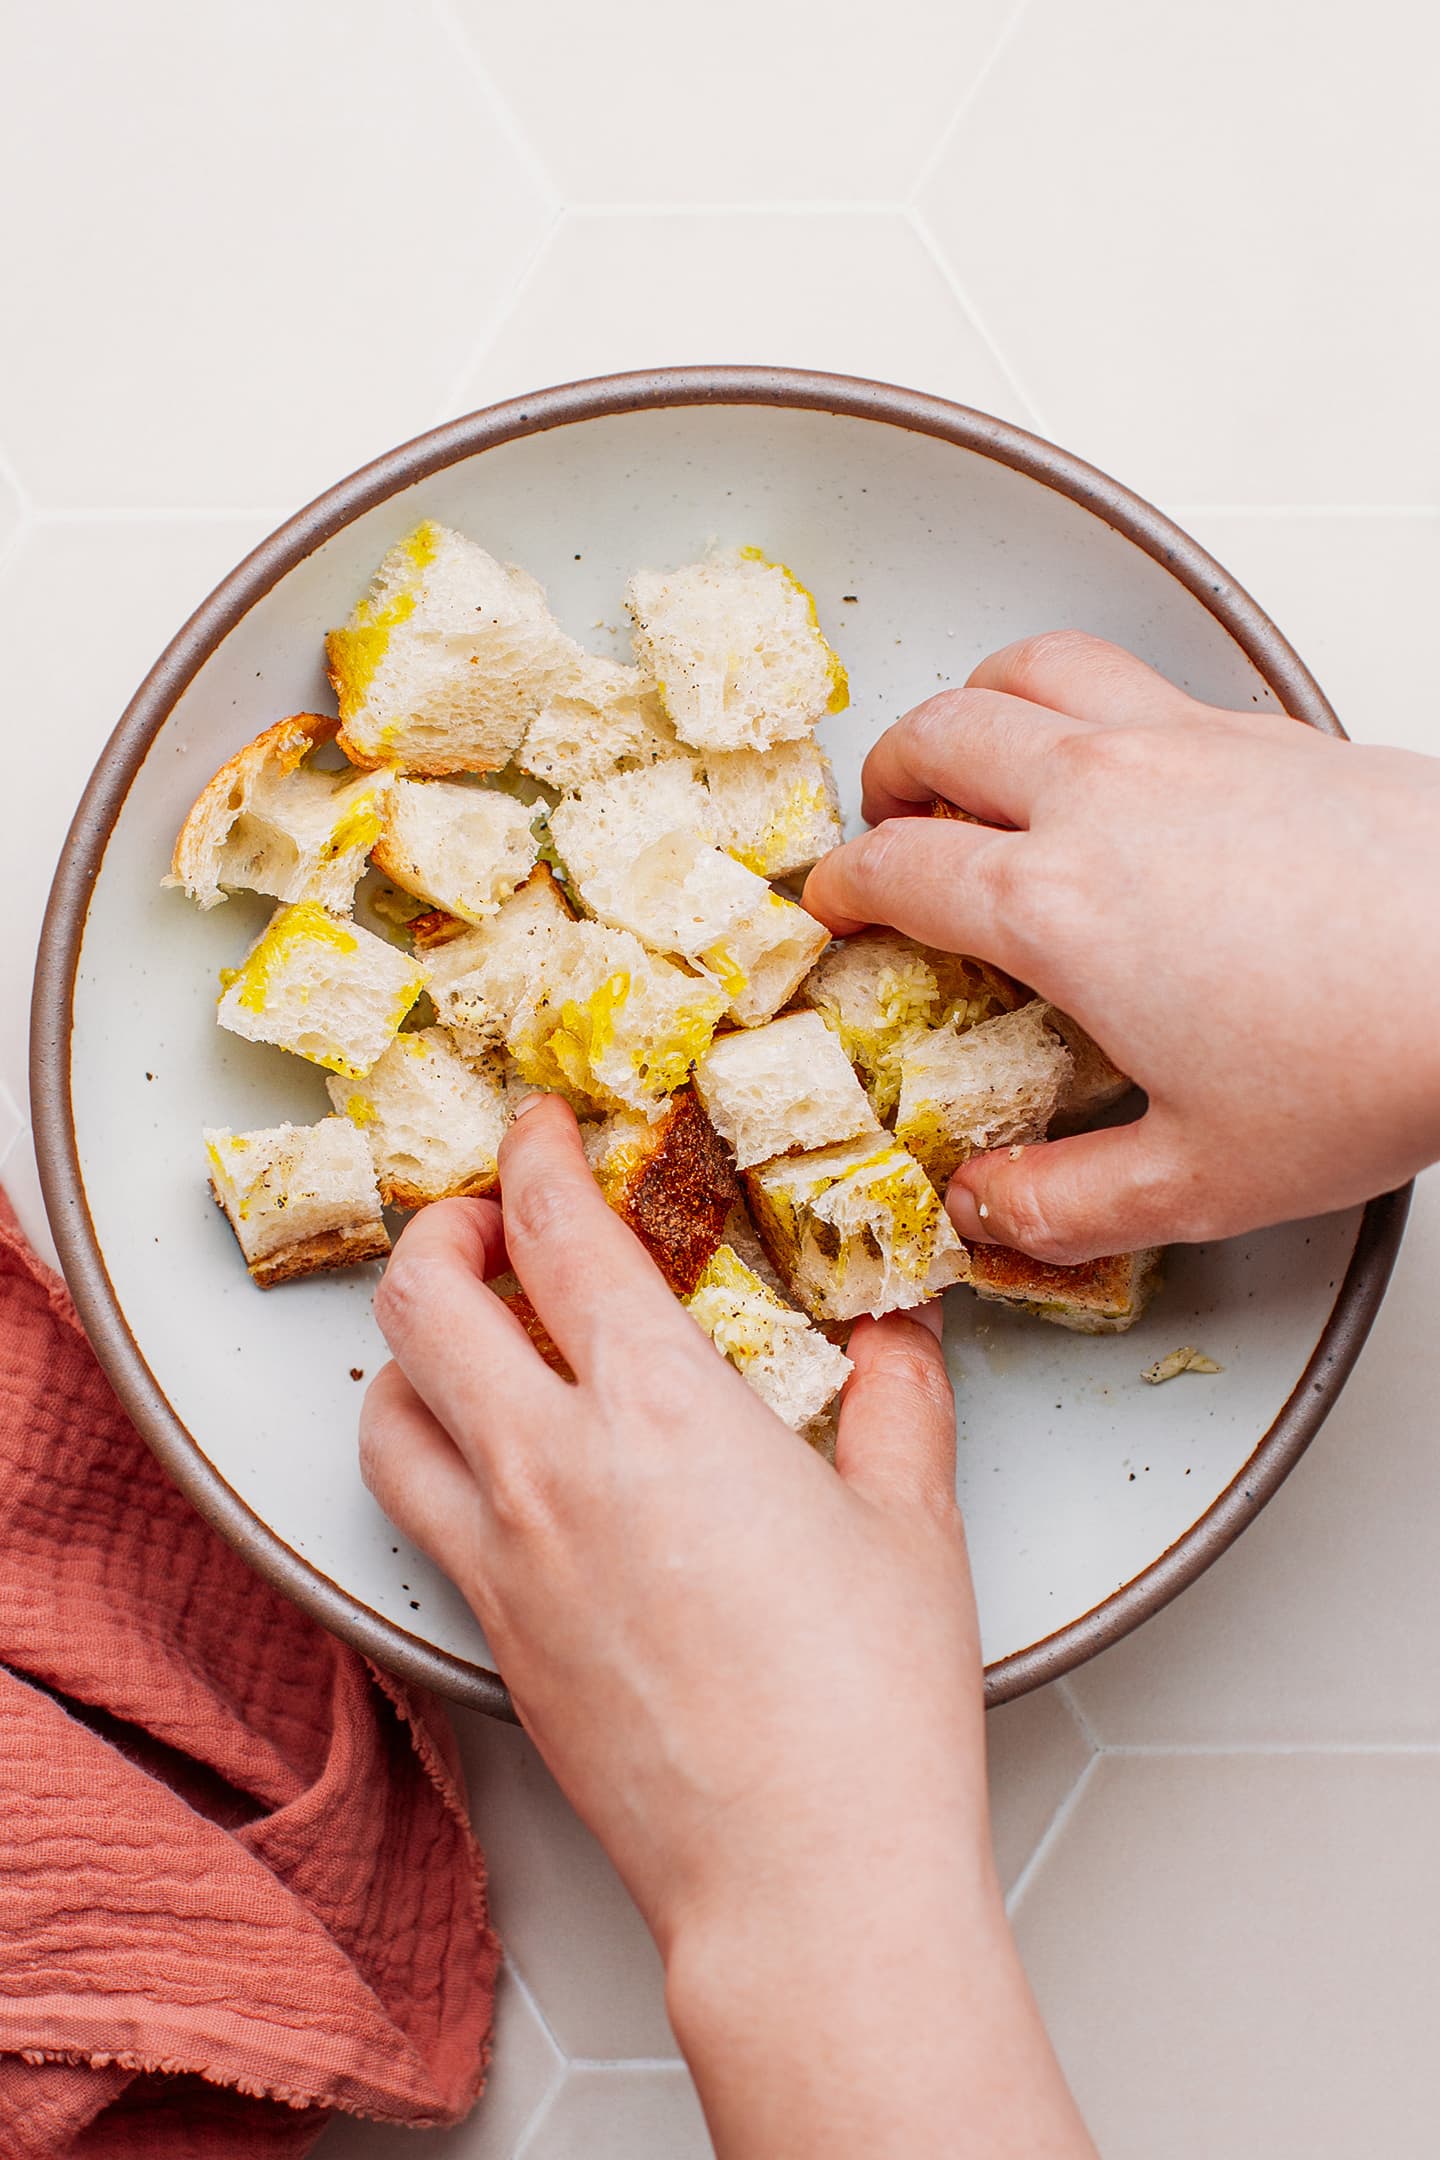 Tossing diced bread with olive oil.